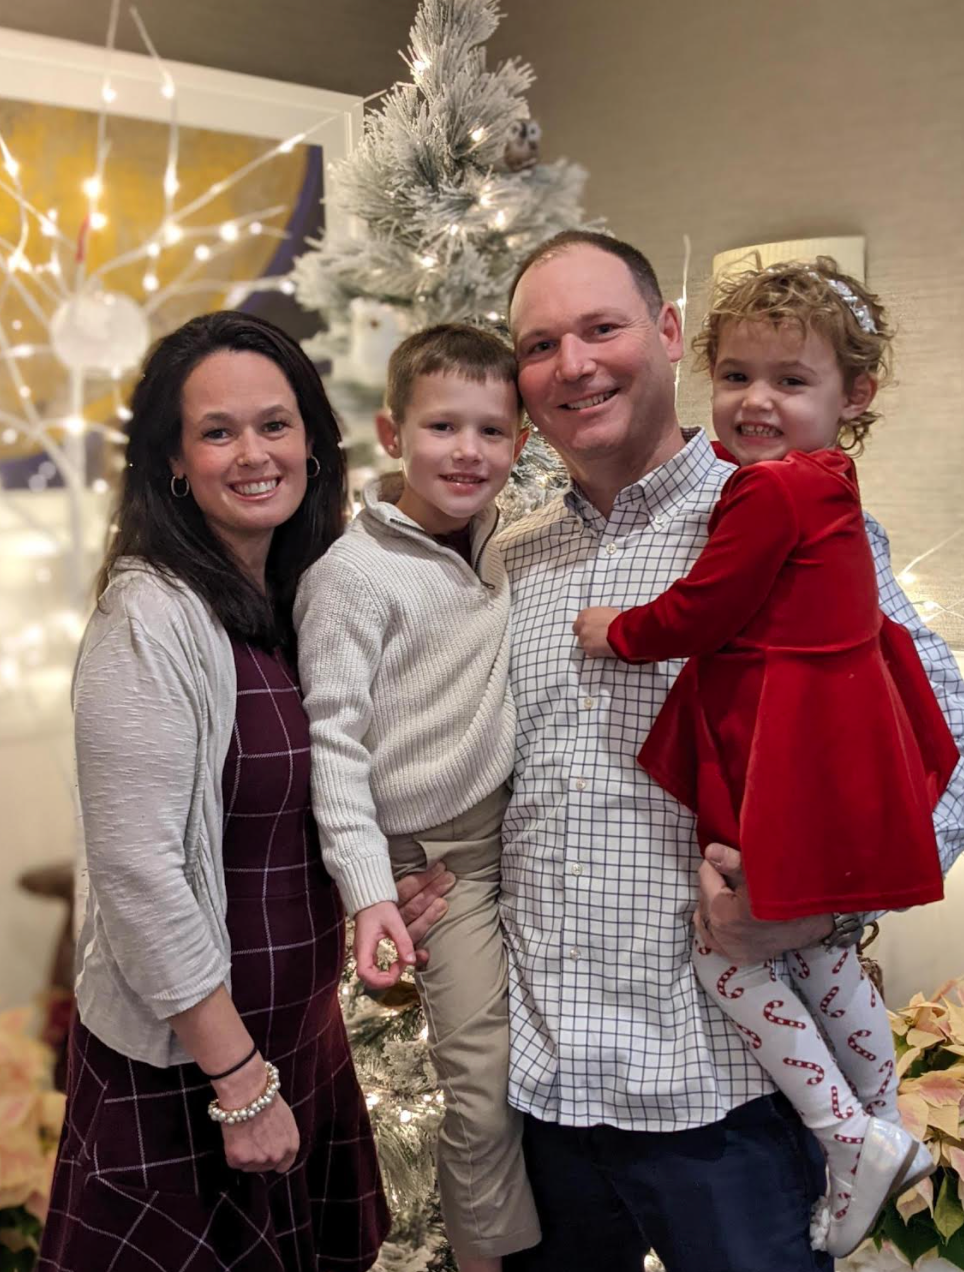 Lauren poses for a picture in front of a frosted Christmas tree with her family, including Peyton